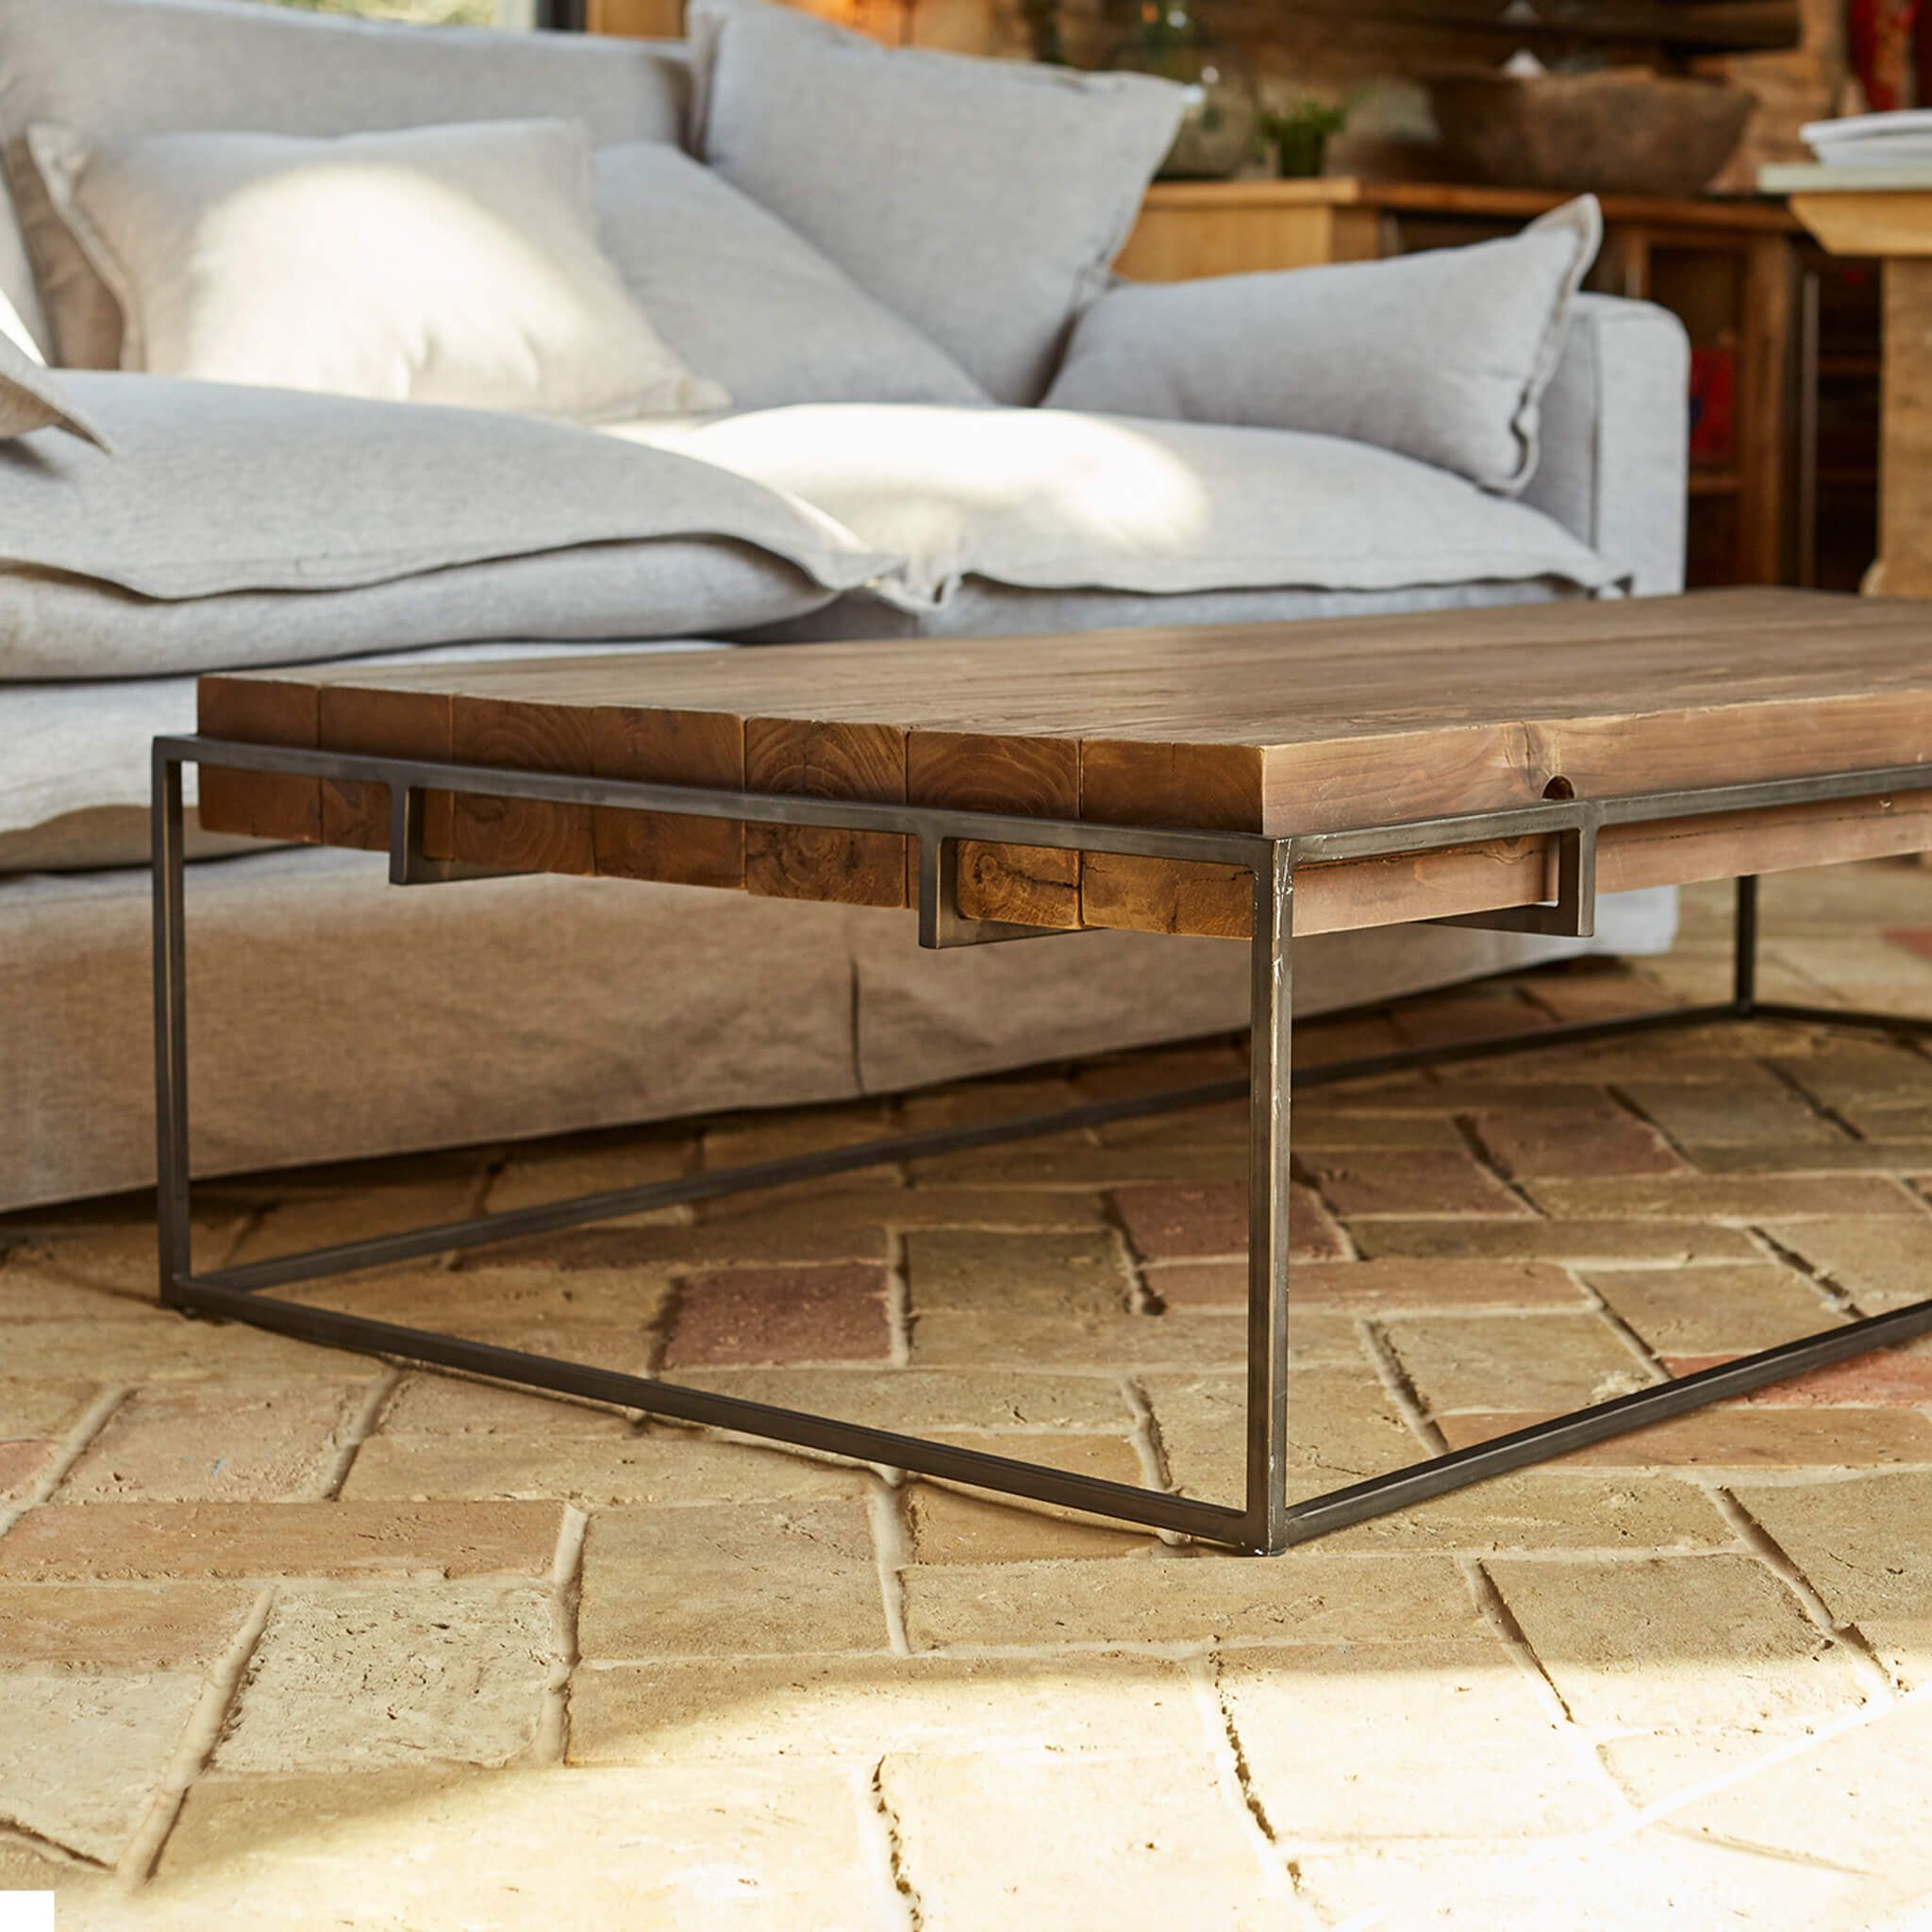 Buy a metal coffee table to relax for
  years while using it